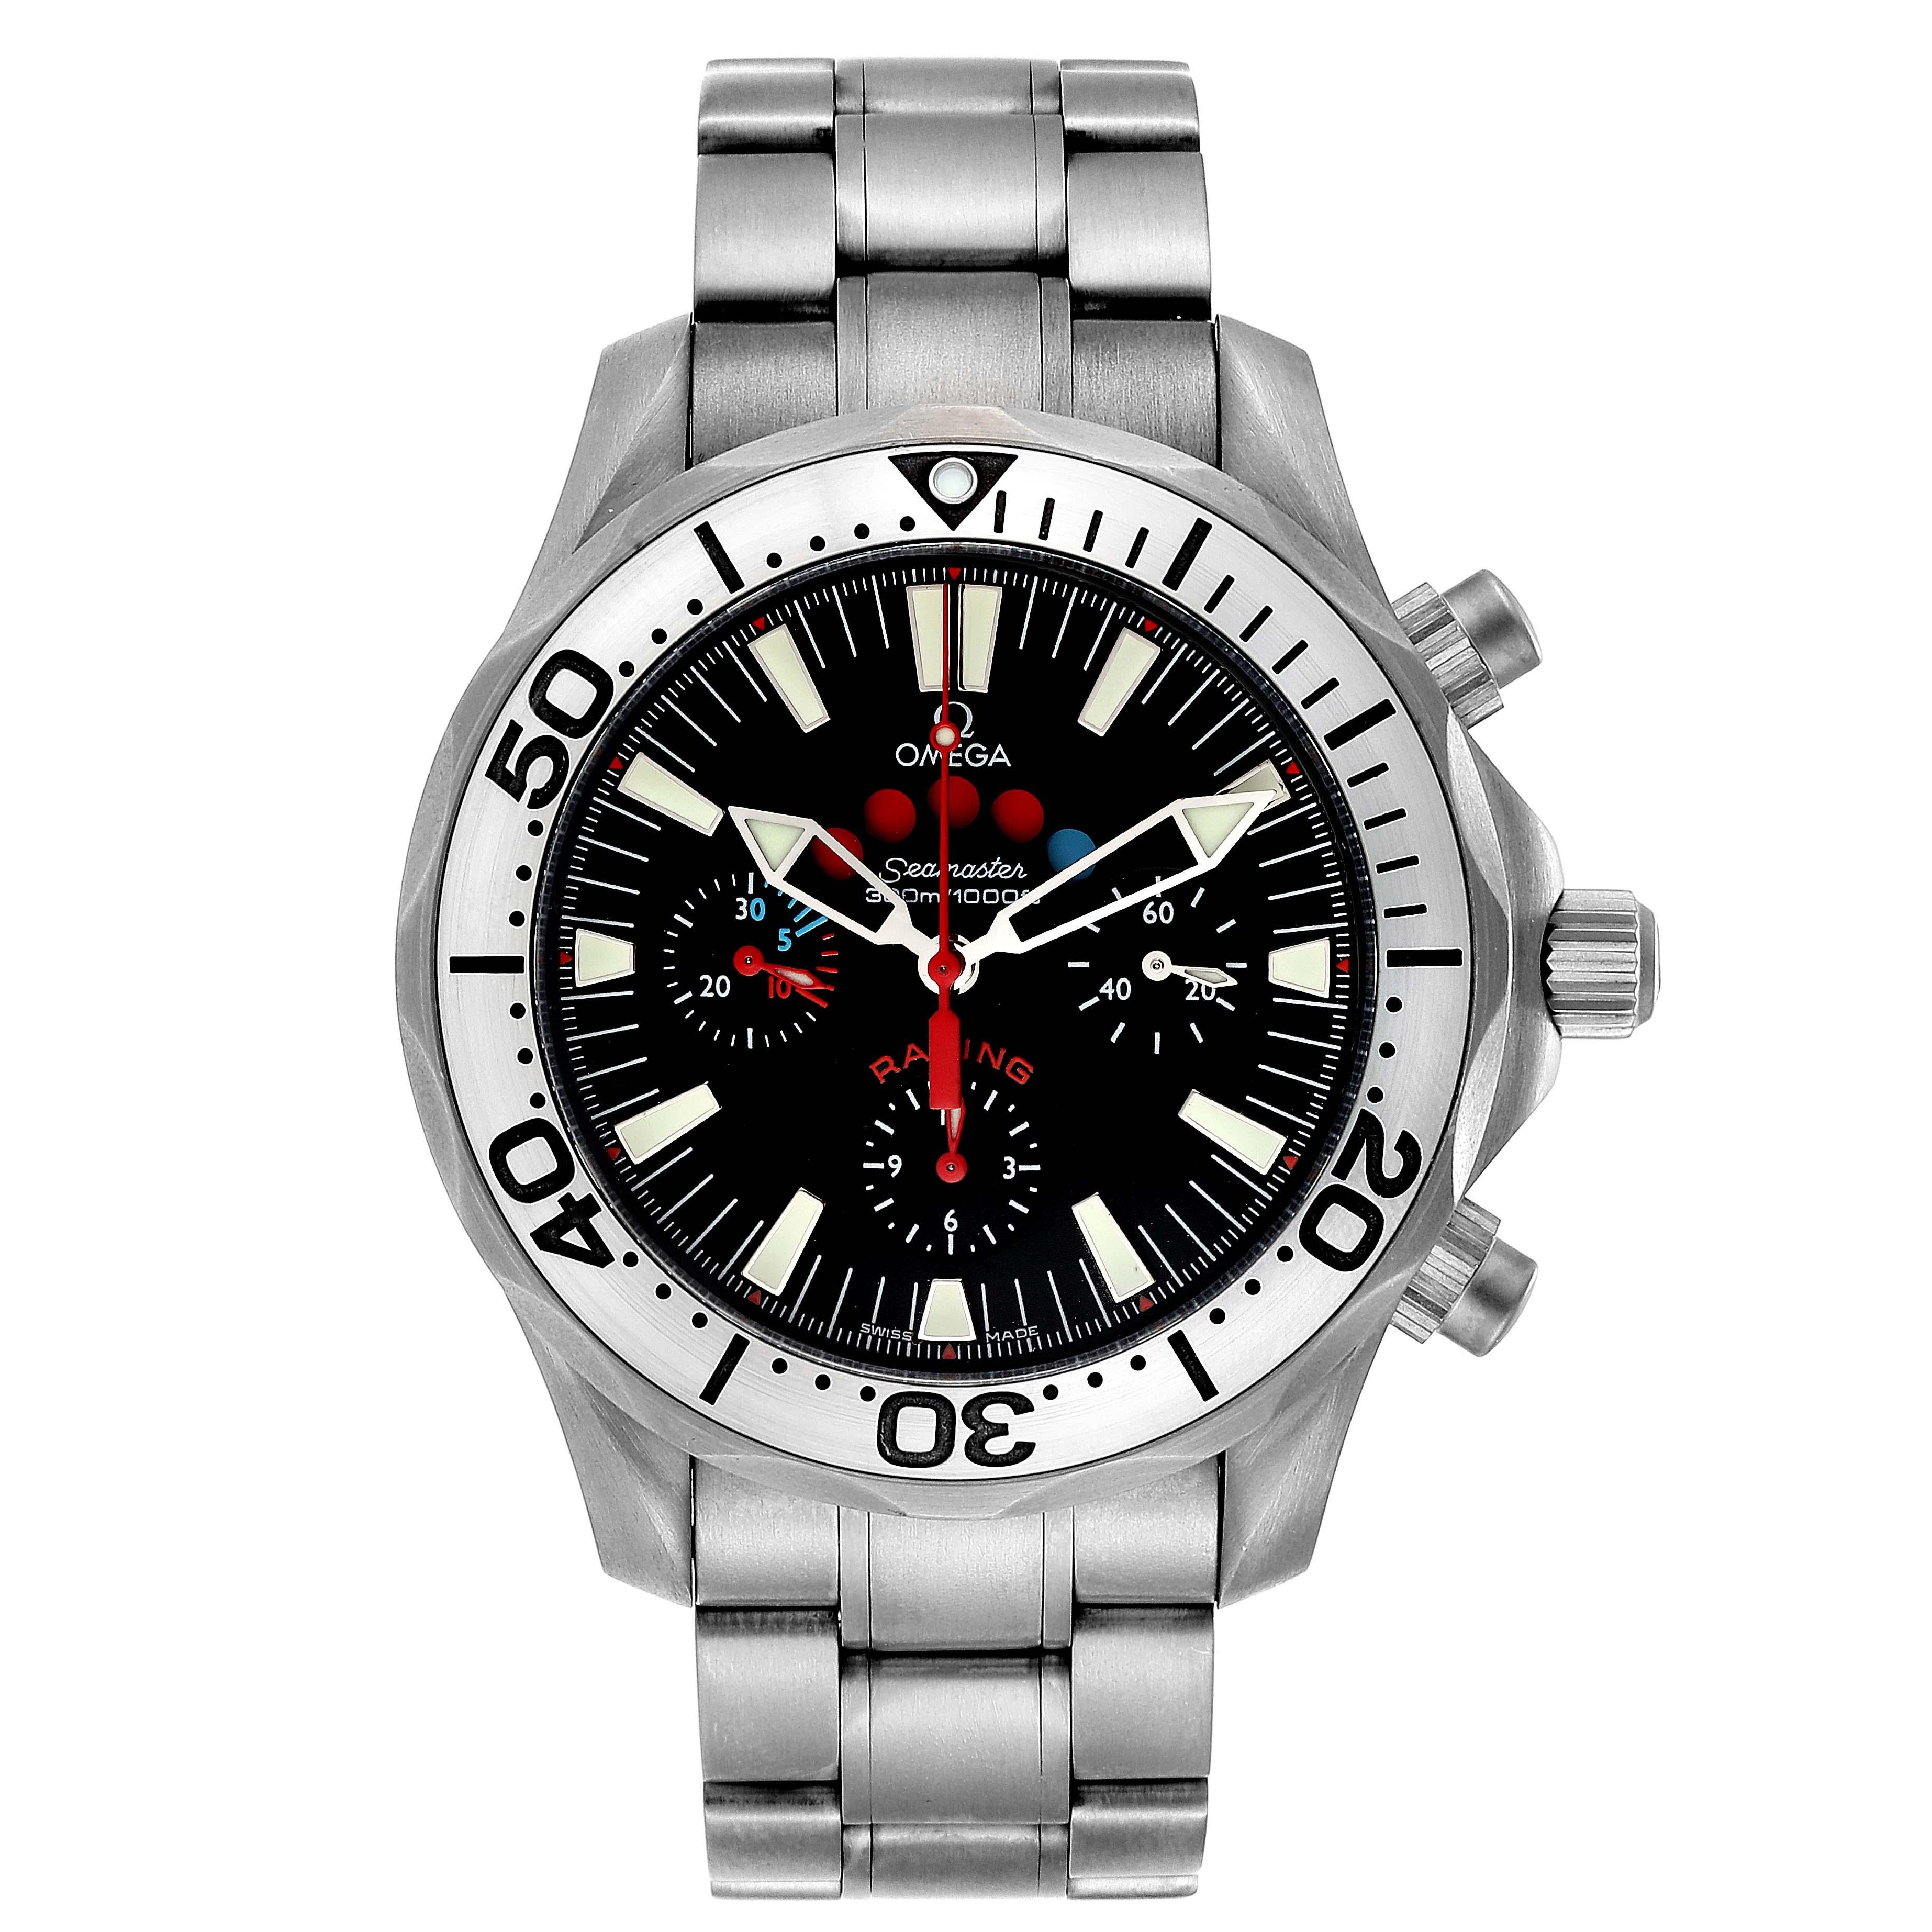 Omega Seamaster Regatta Racing Titanium Mens Watch 2269.52.00 Card. Officially certified chronometer automatic self-winding movement. Chronograph function. Titanium case 44 mm in diameter. Omega logo on a crown. Unidirectional rotating ratcheted